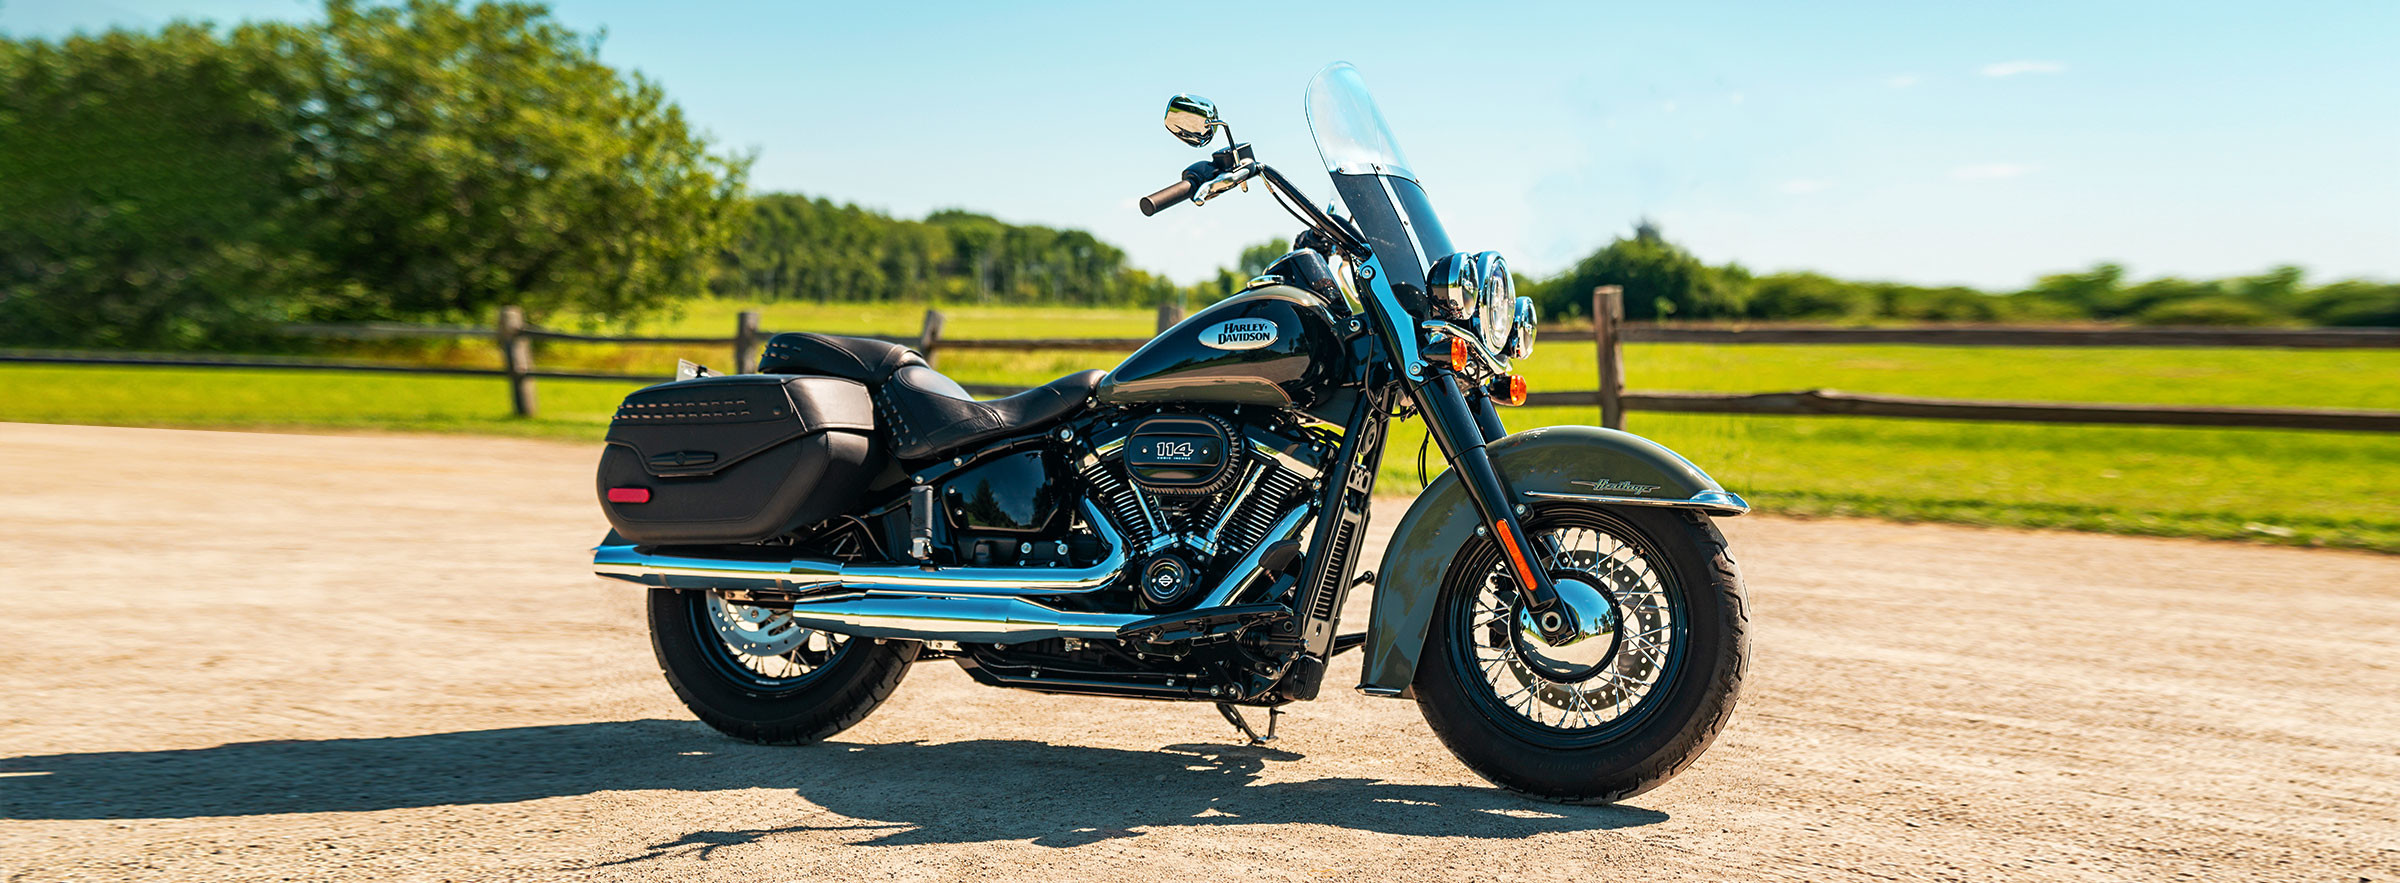 2021 Harley Davidson Heritage Classic Specs Features Photos Wbw